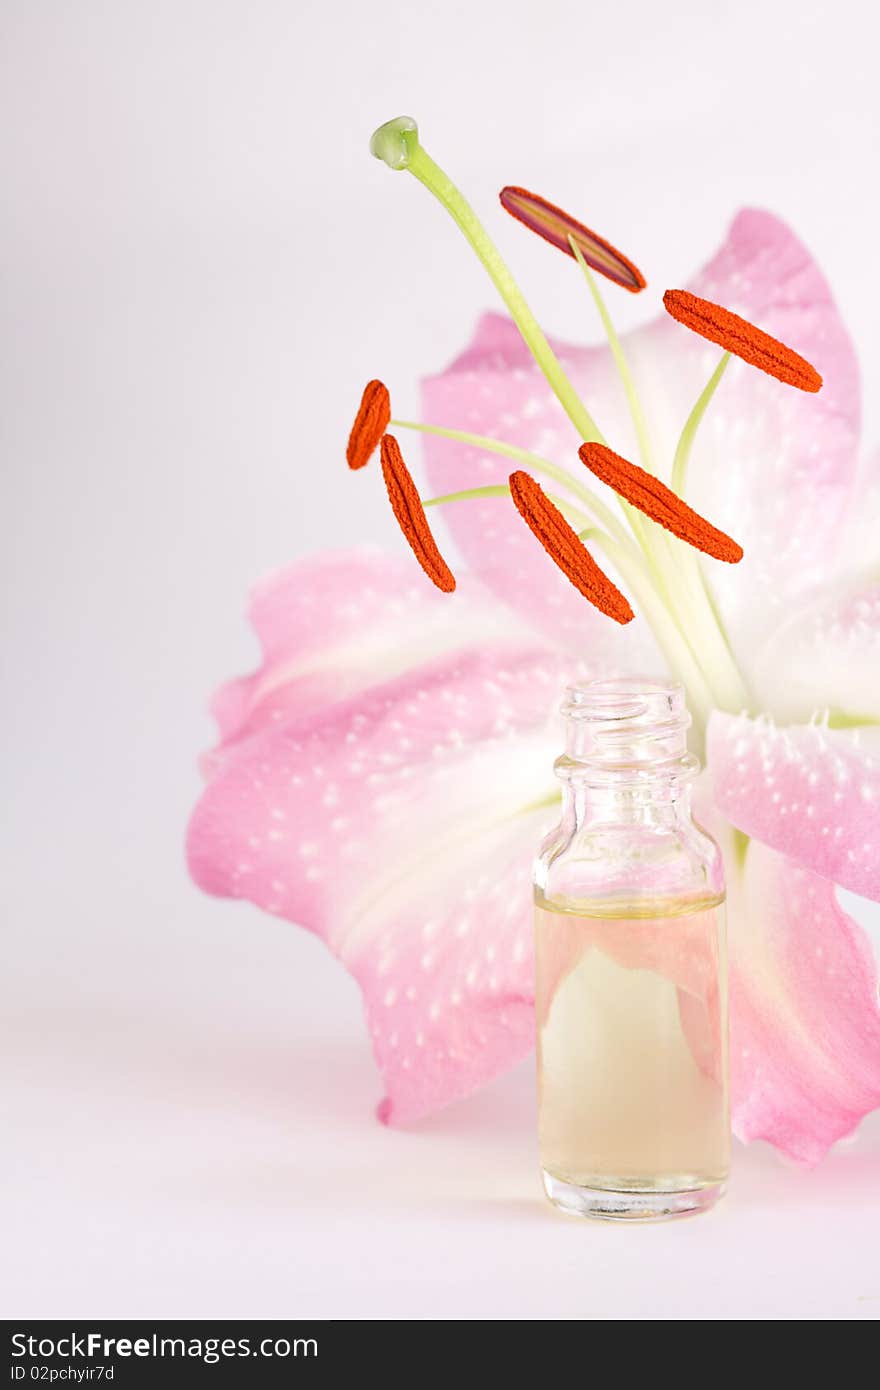 Essential oil set in front of fragrant pink lily. Essential oil set in front of fragrant pink lily